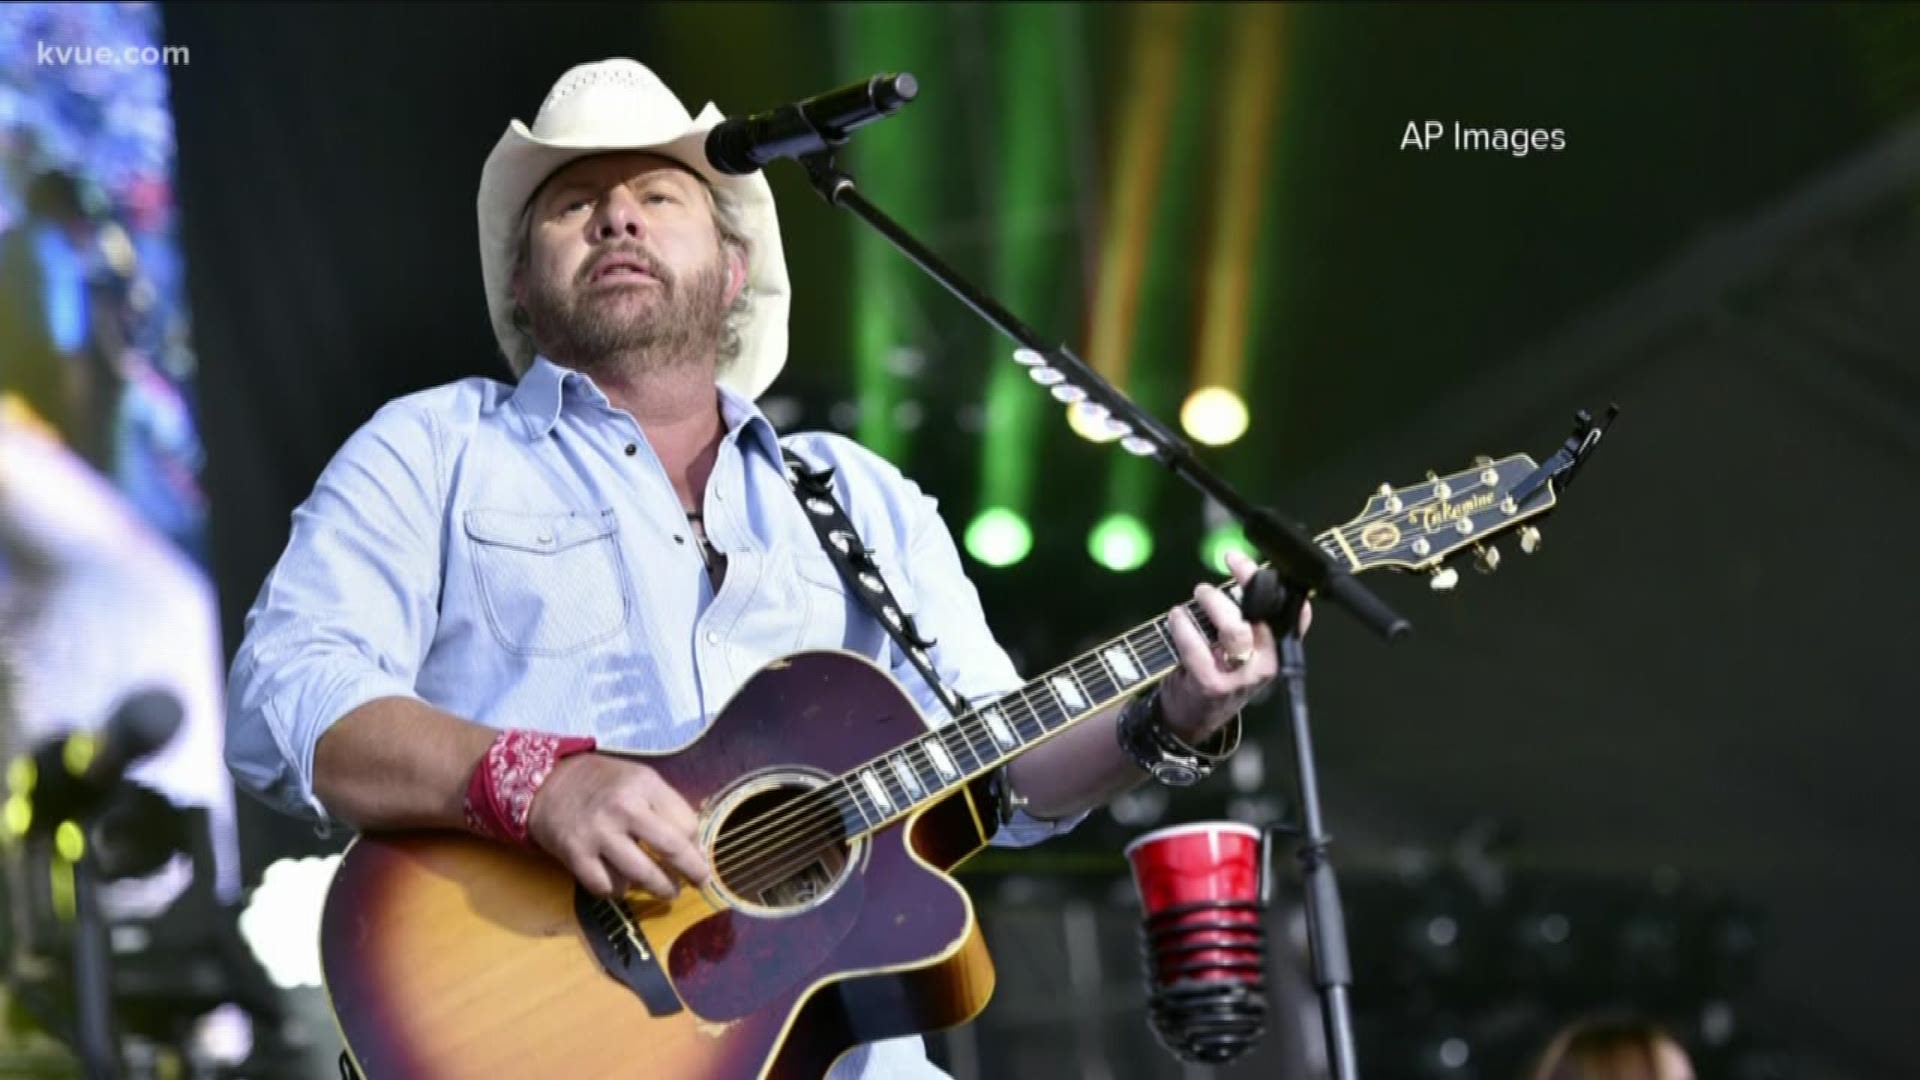 Superstar Toby Keith is coming to Central Texas! He's performing at the H-E-B Center in Cedar Park in September.